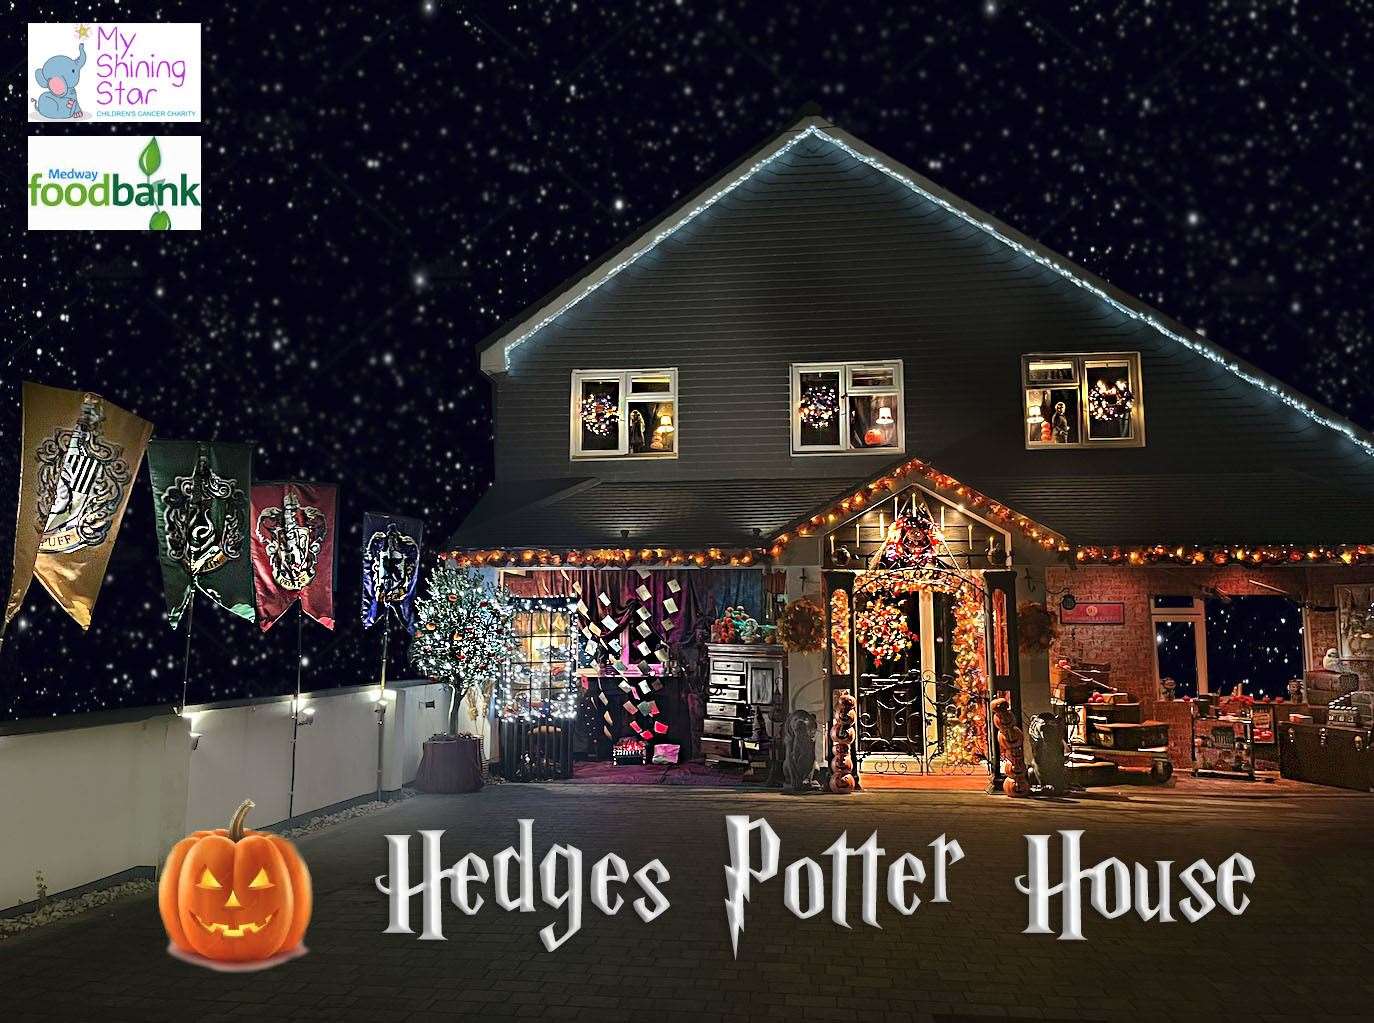 The Hedges' Harry Potter house is more Gryffindor than Wigmore